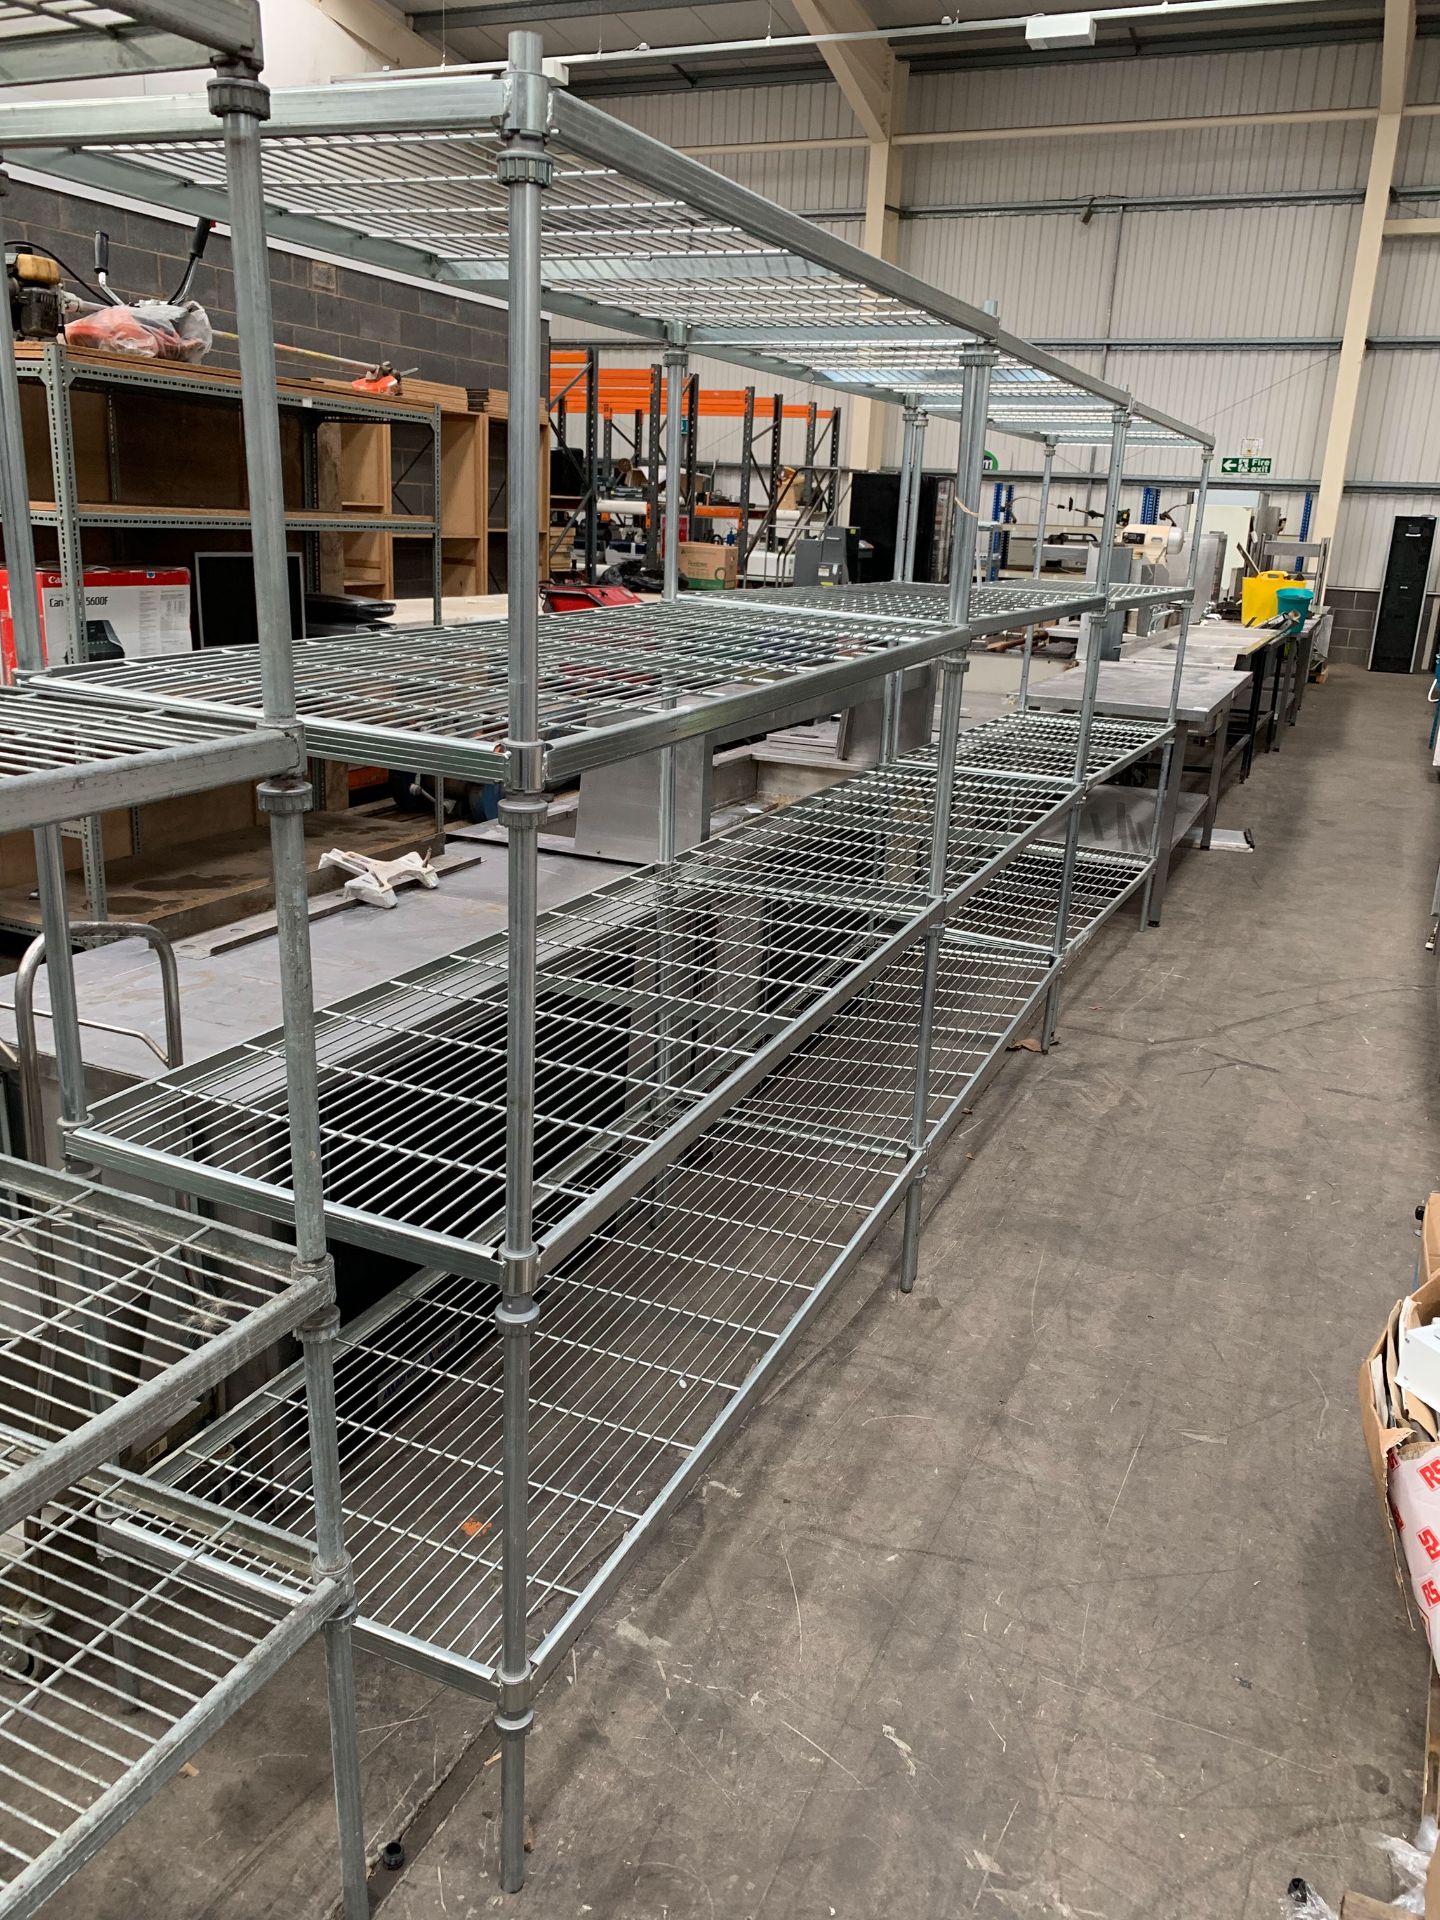 4x Boltless Wire Racks each with 4 Shelves